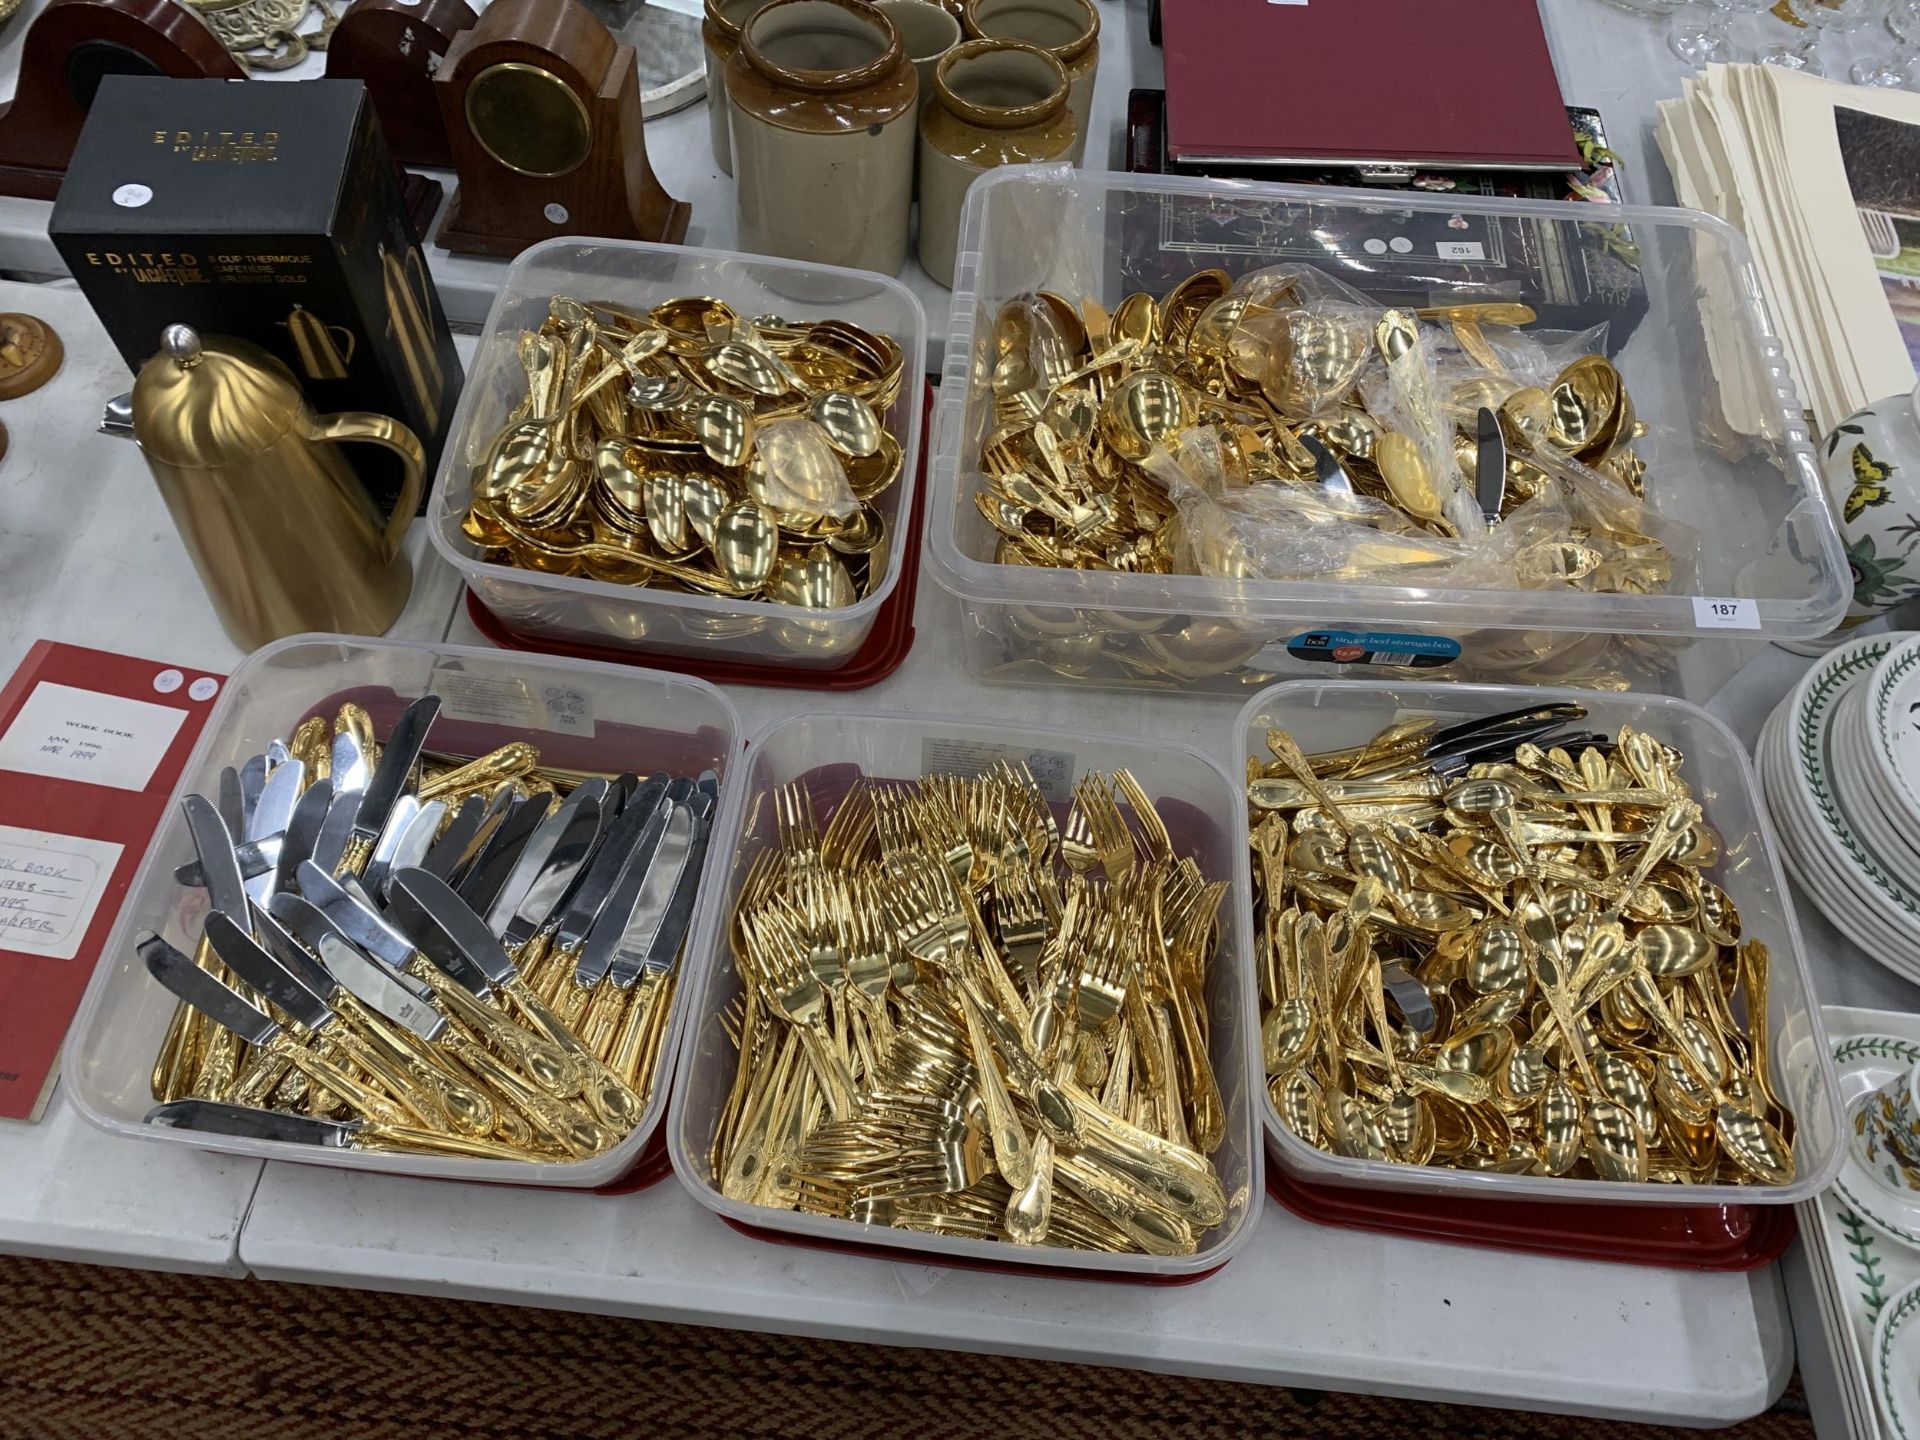 A VERY LARGE QUANTITY OF GOLD PLATED FLATWARE